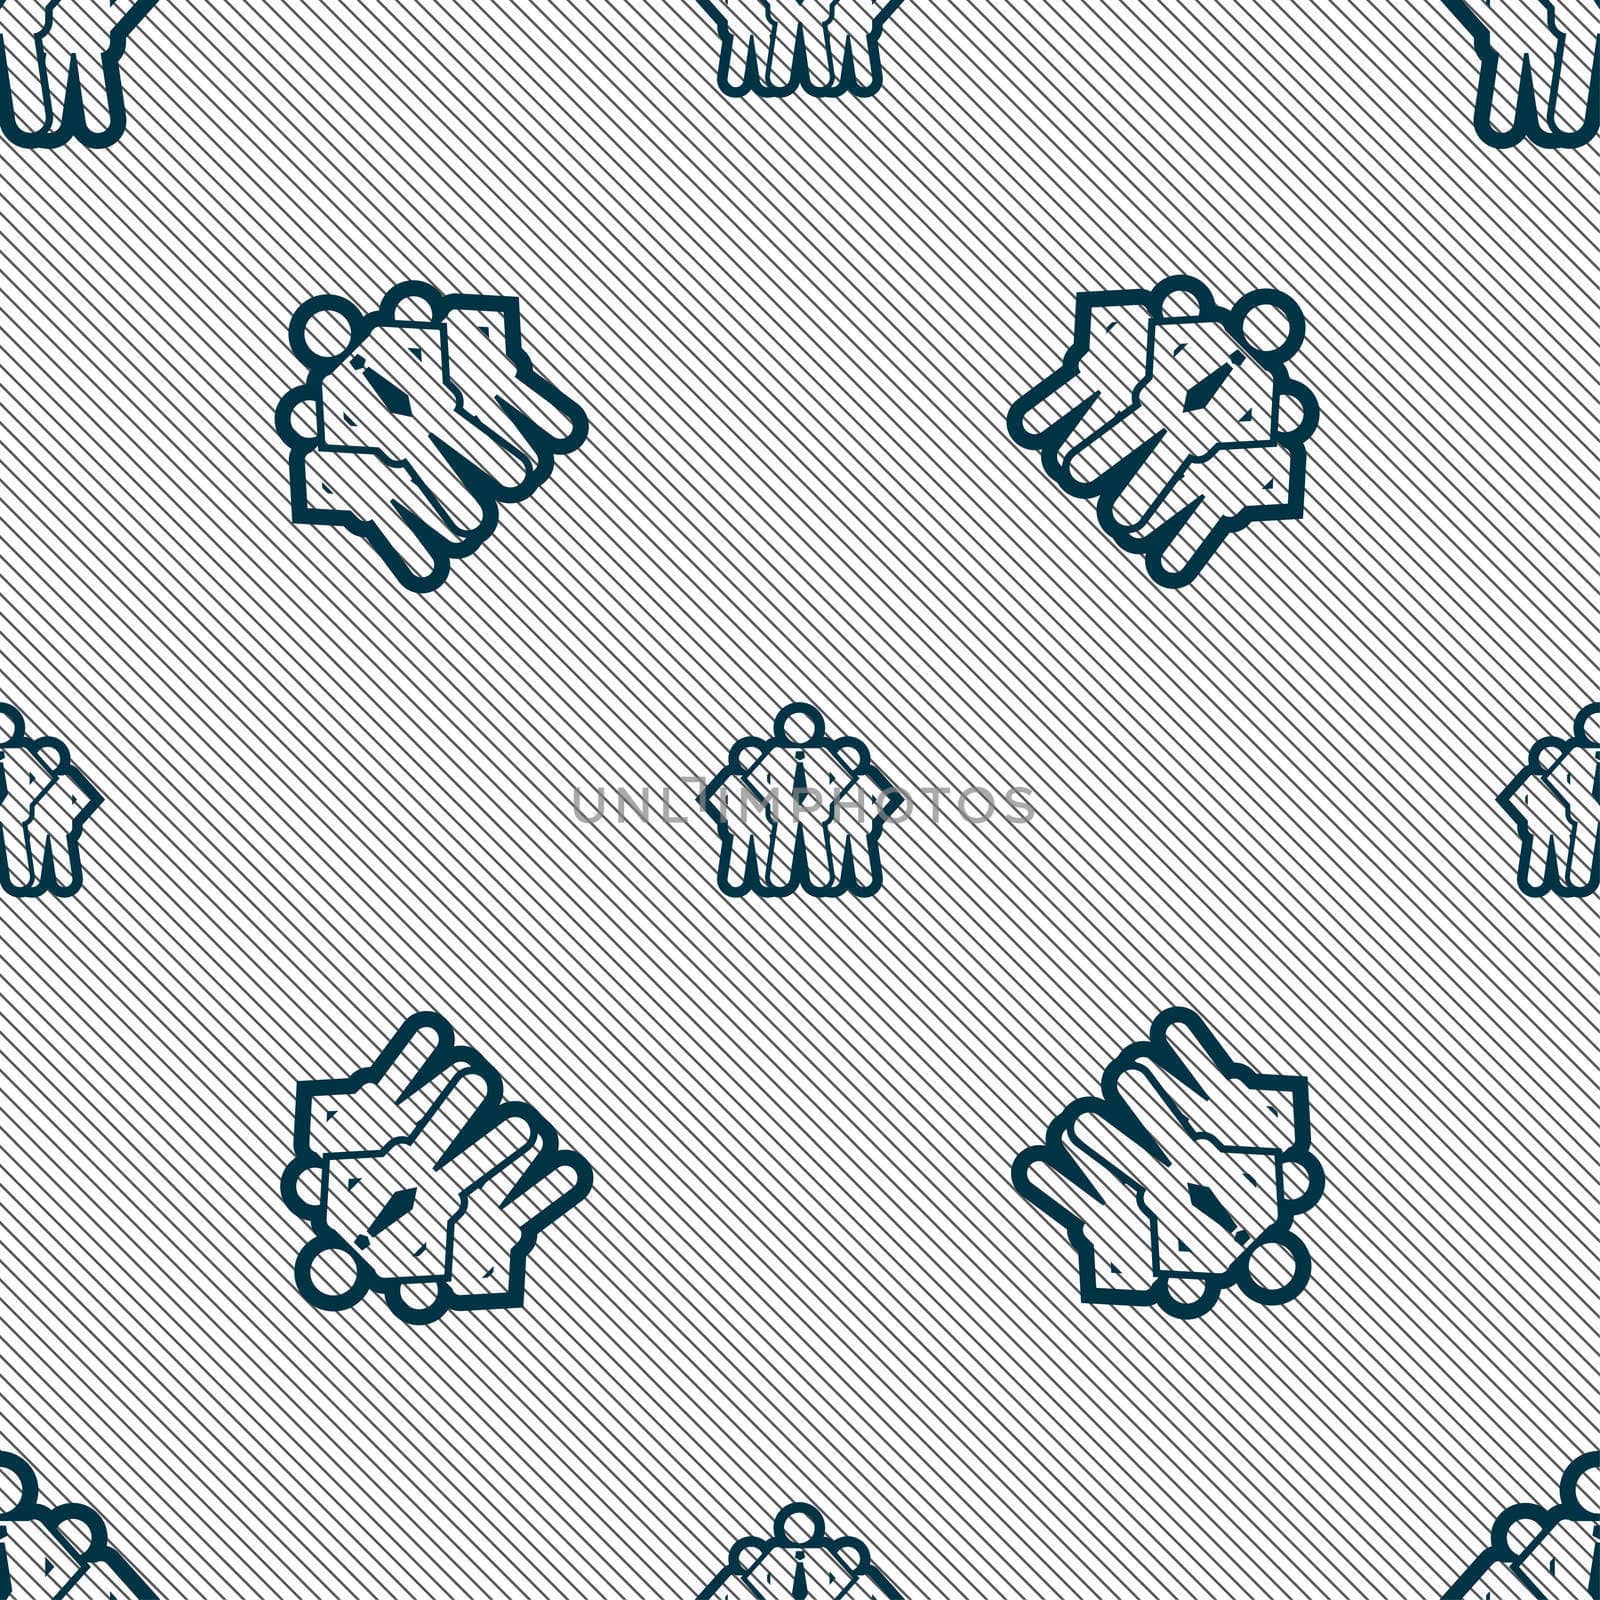 business team icon sign. Seamless pattern with geometric texture. illustration